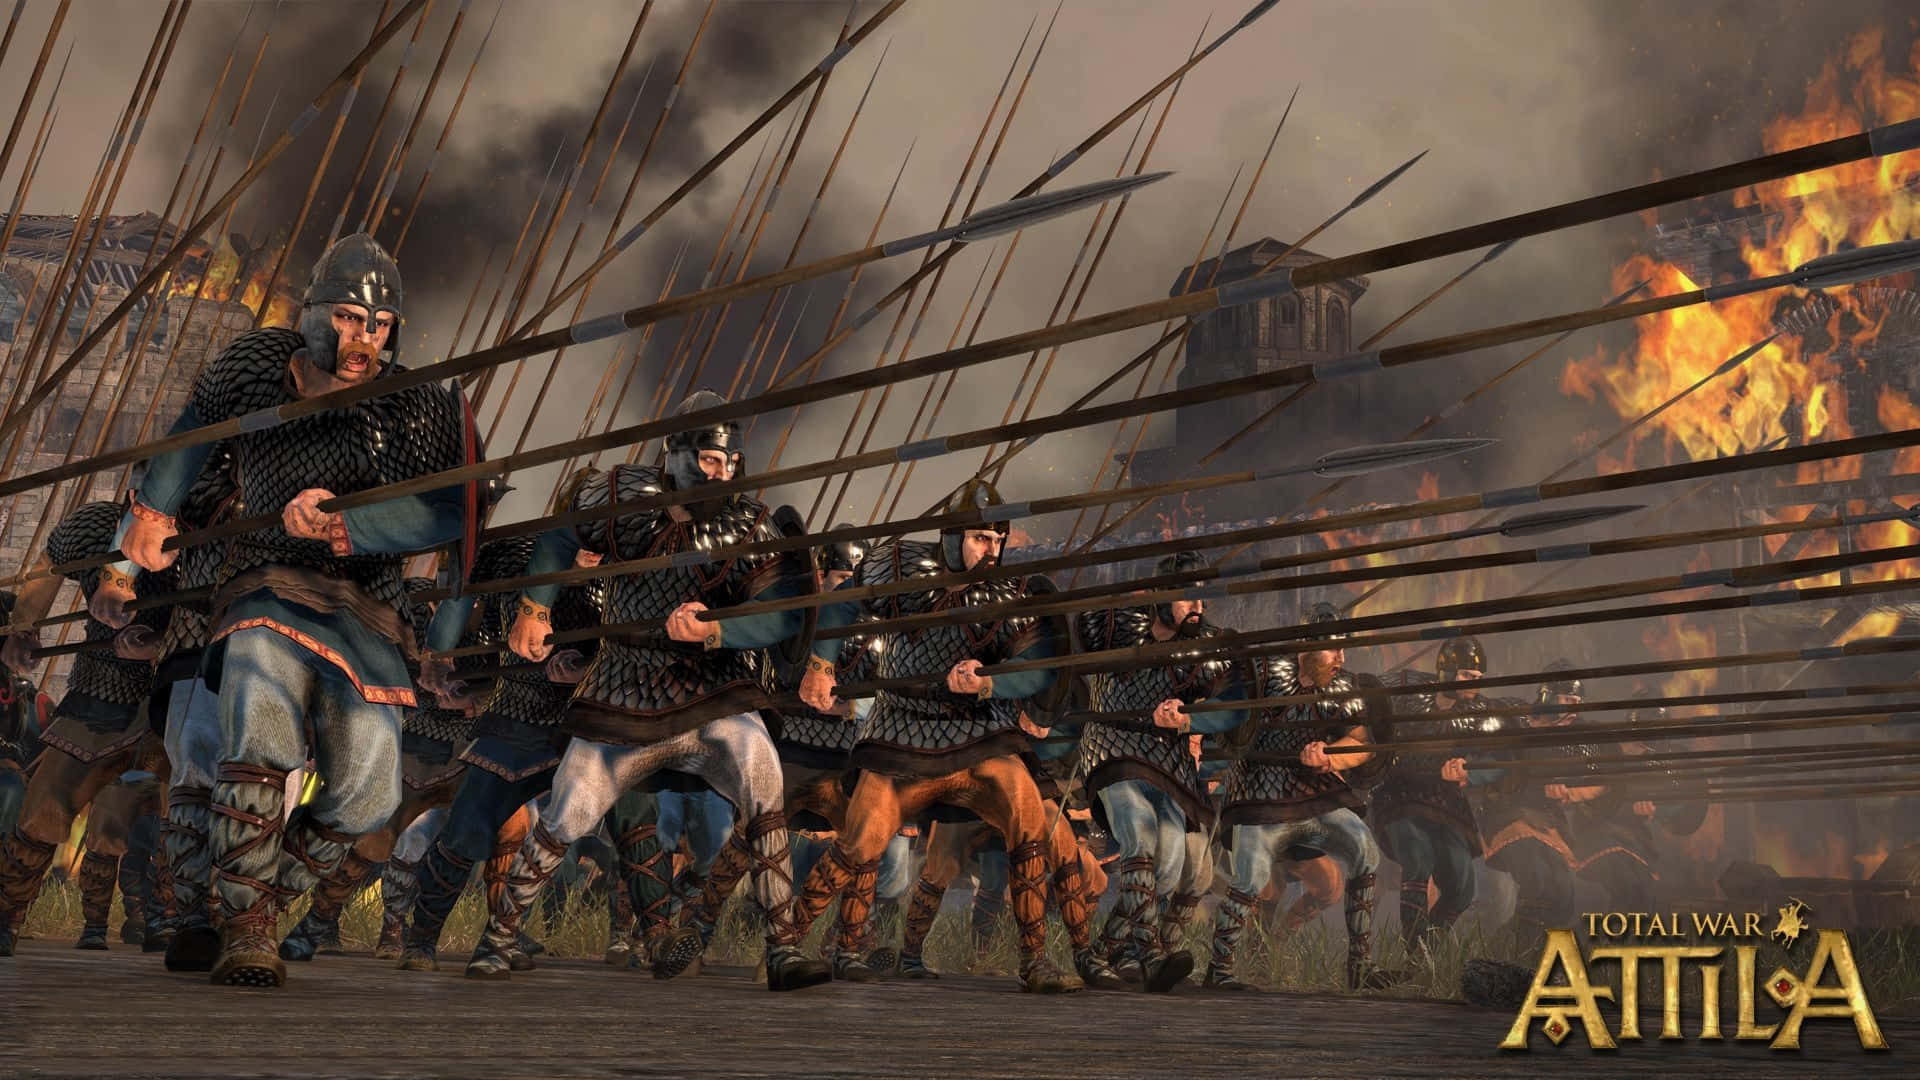 Master The Art Of War In The Awesome Game Attila Total War